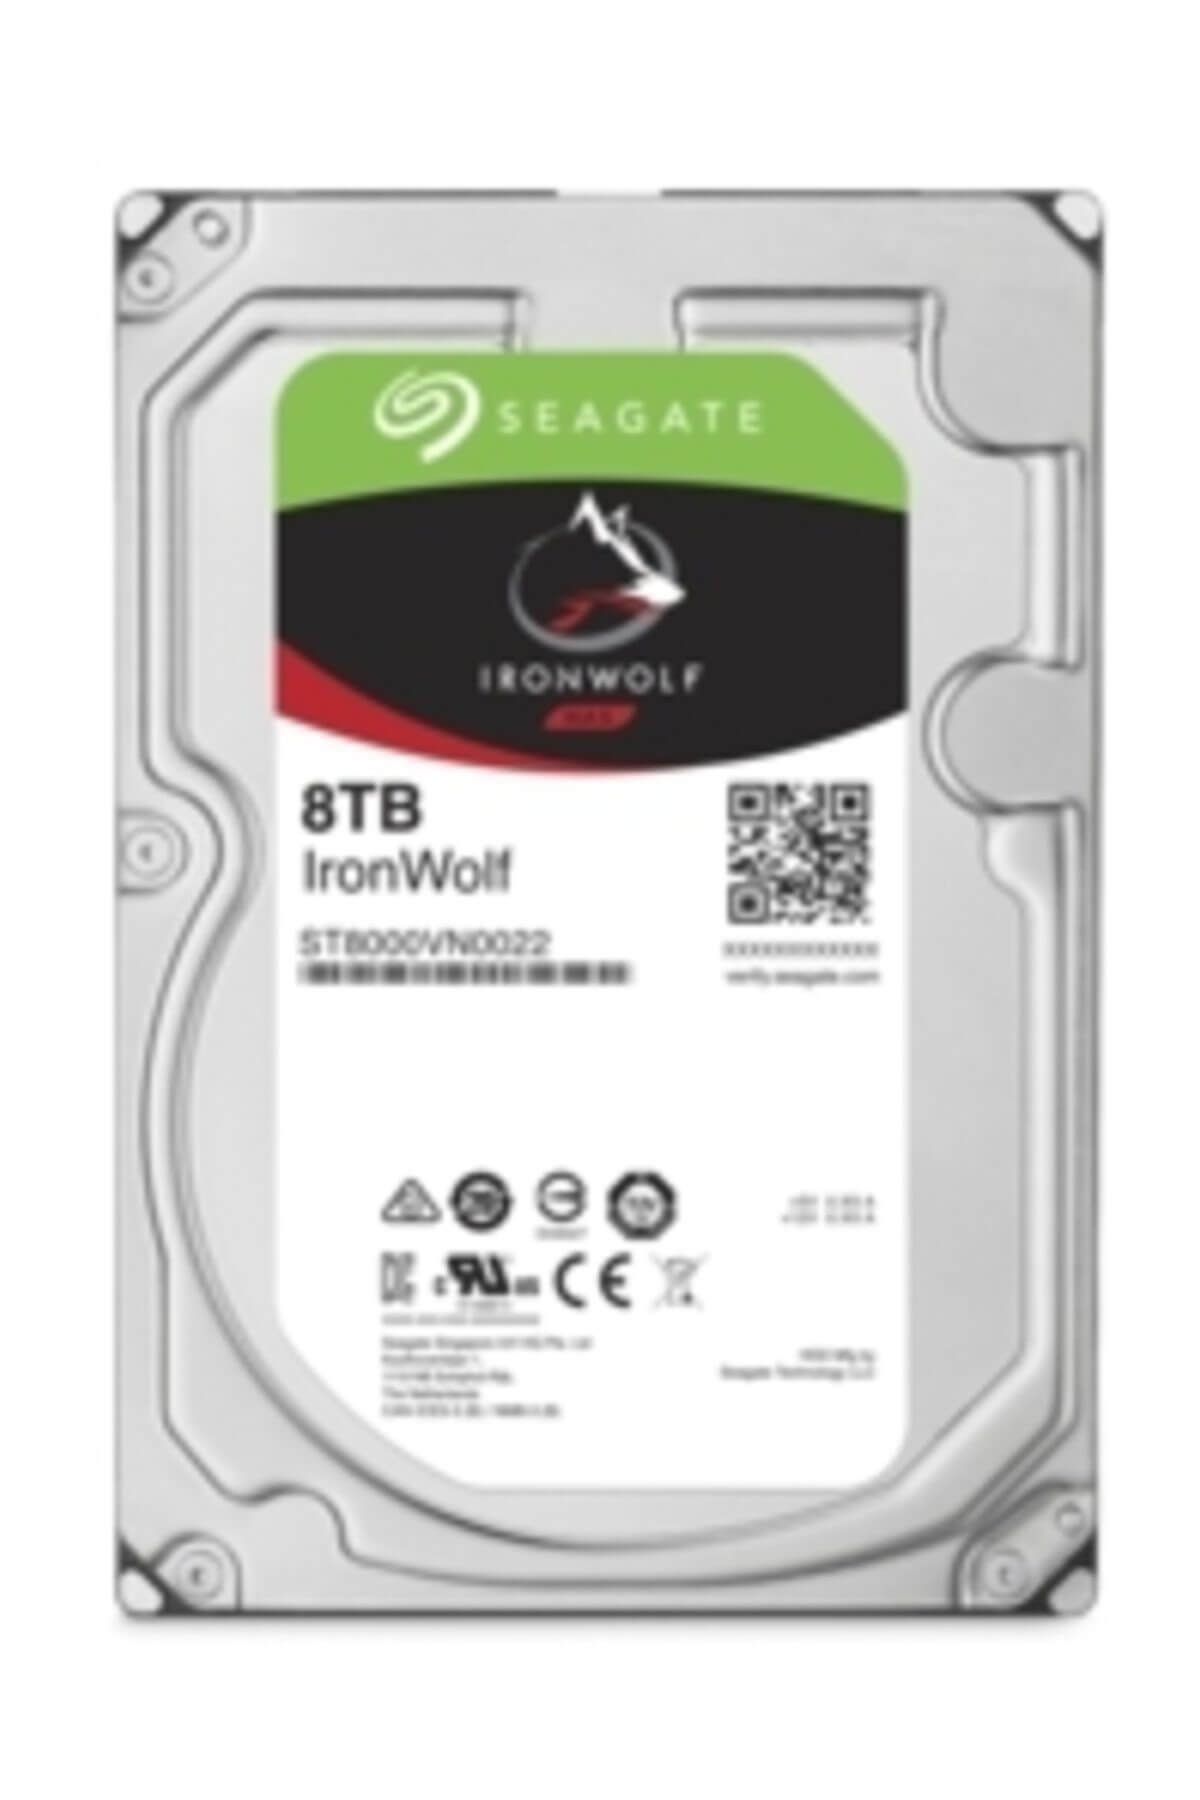 Seagate IronWolf 3.5 8TB 7200Rpm 256Mb ST8000VN0022